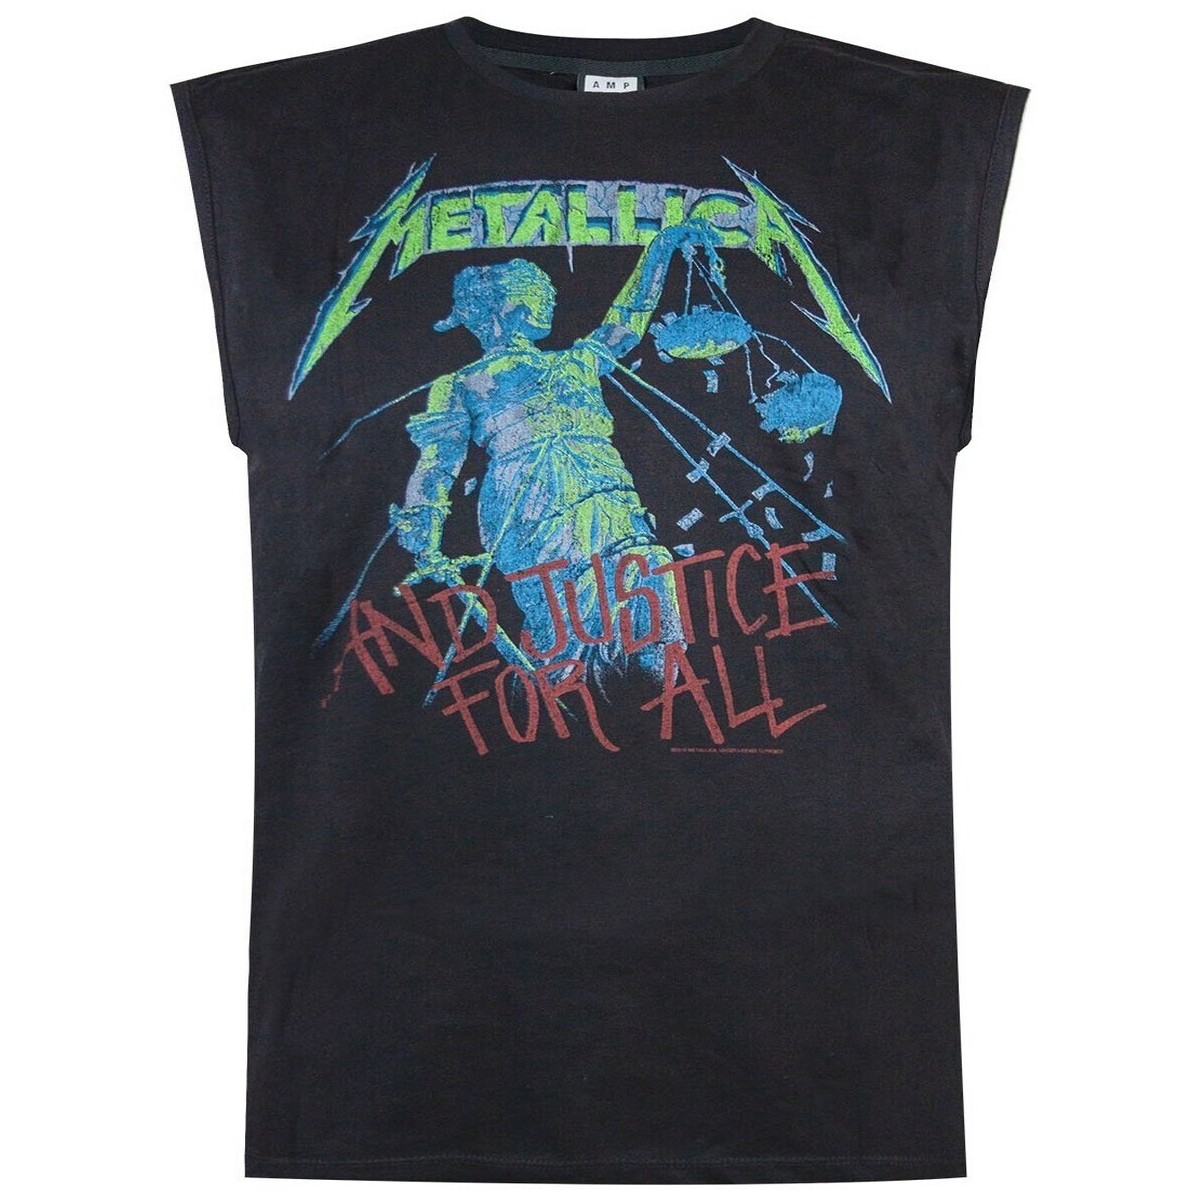 textil Hombre Camisetas sin mangas Amplified Justice For All Negro